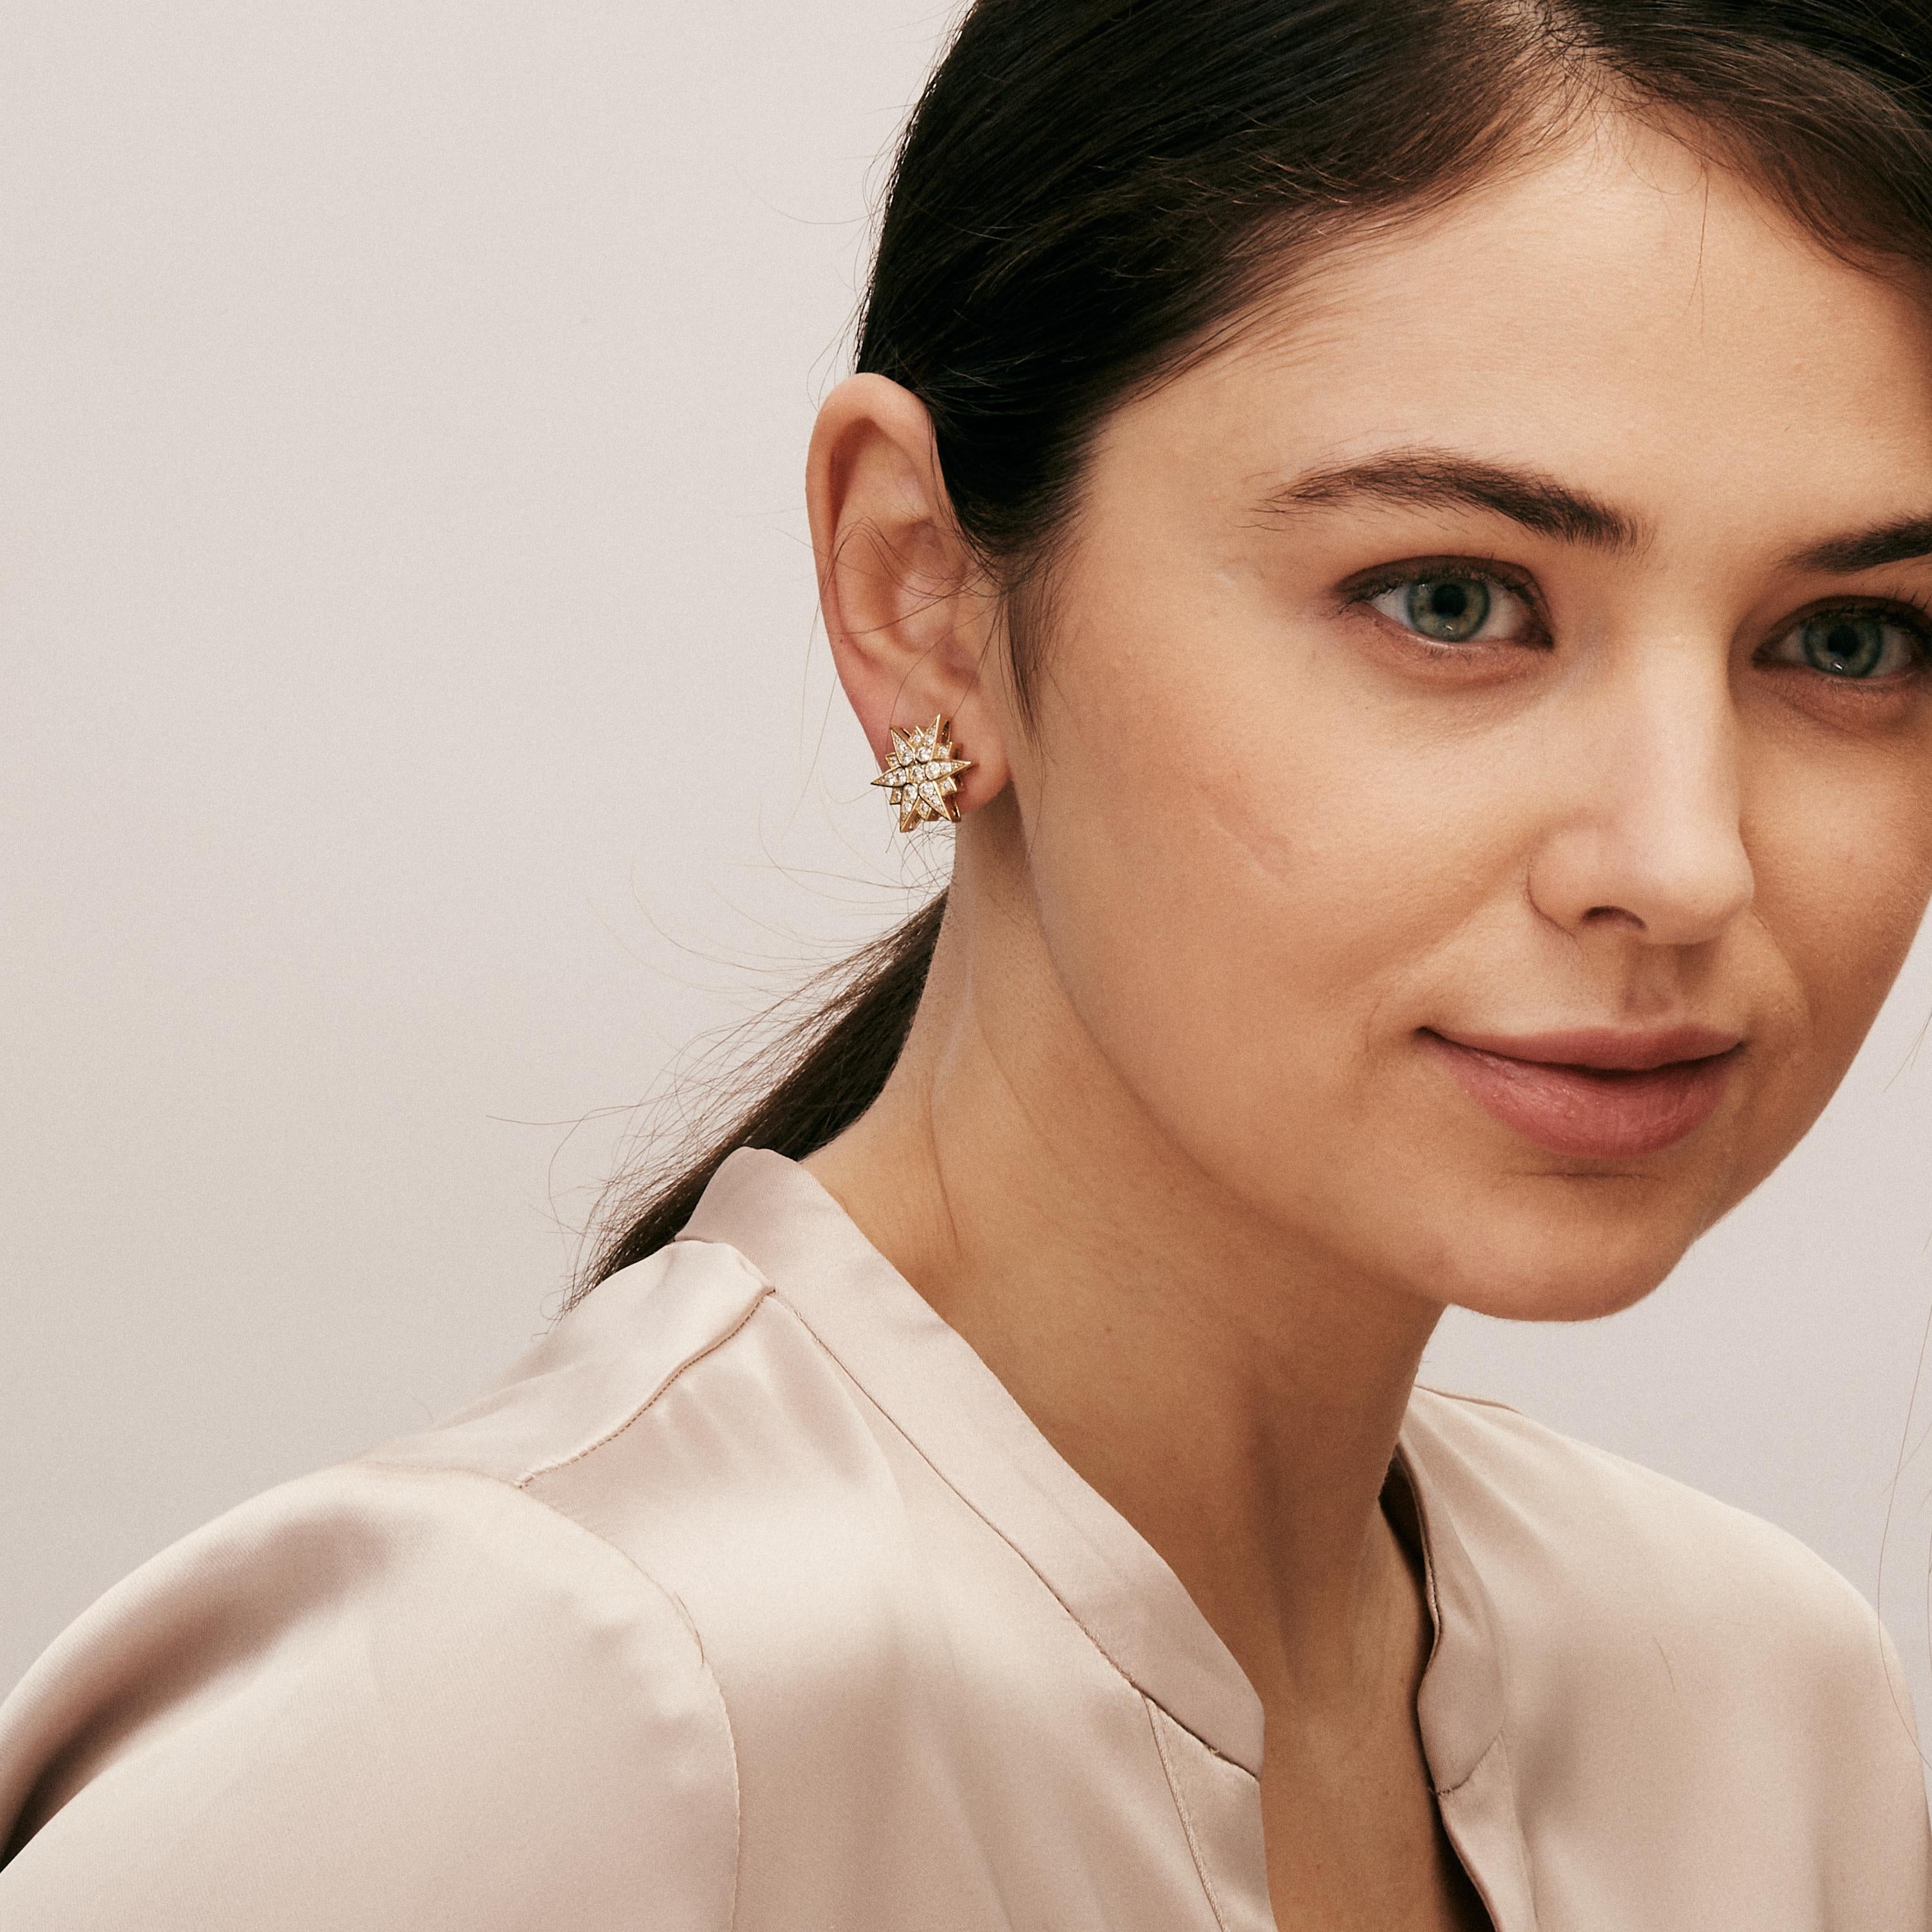 Created in 18 karat yellow gold
Diamonds 1.25 carats approx.
Post backs for pierced ears
Limited edition

Crafted from luxurious 18 karat yellow gold, these luminous earrings are dotted with a dazzling 1.25 carat diamond display, and fasten securely